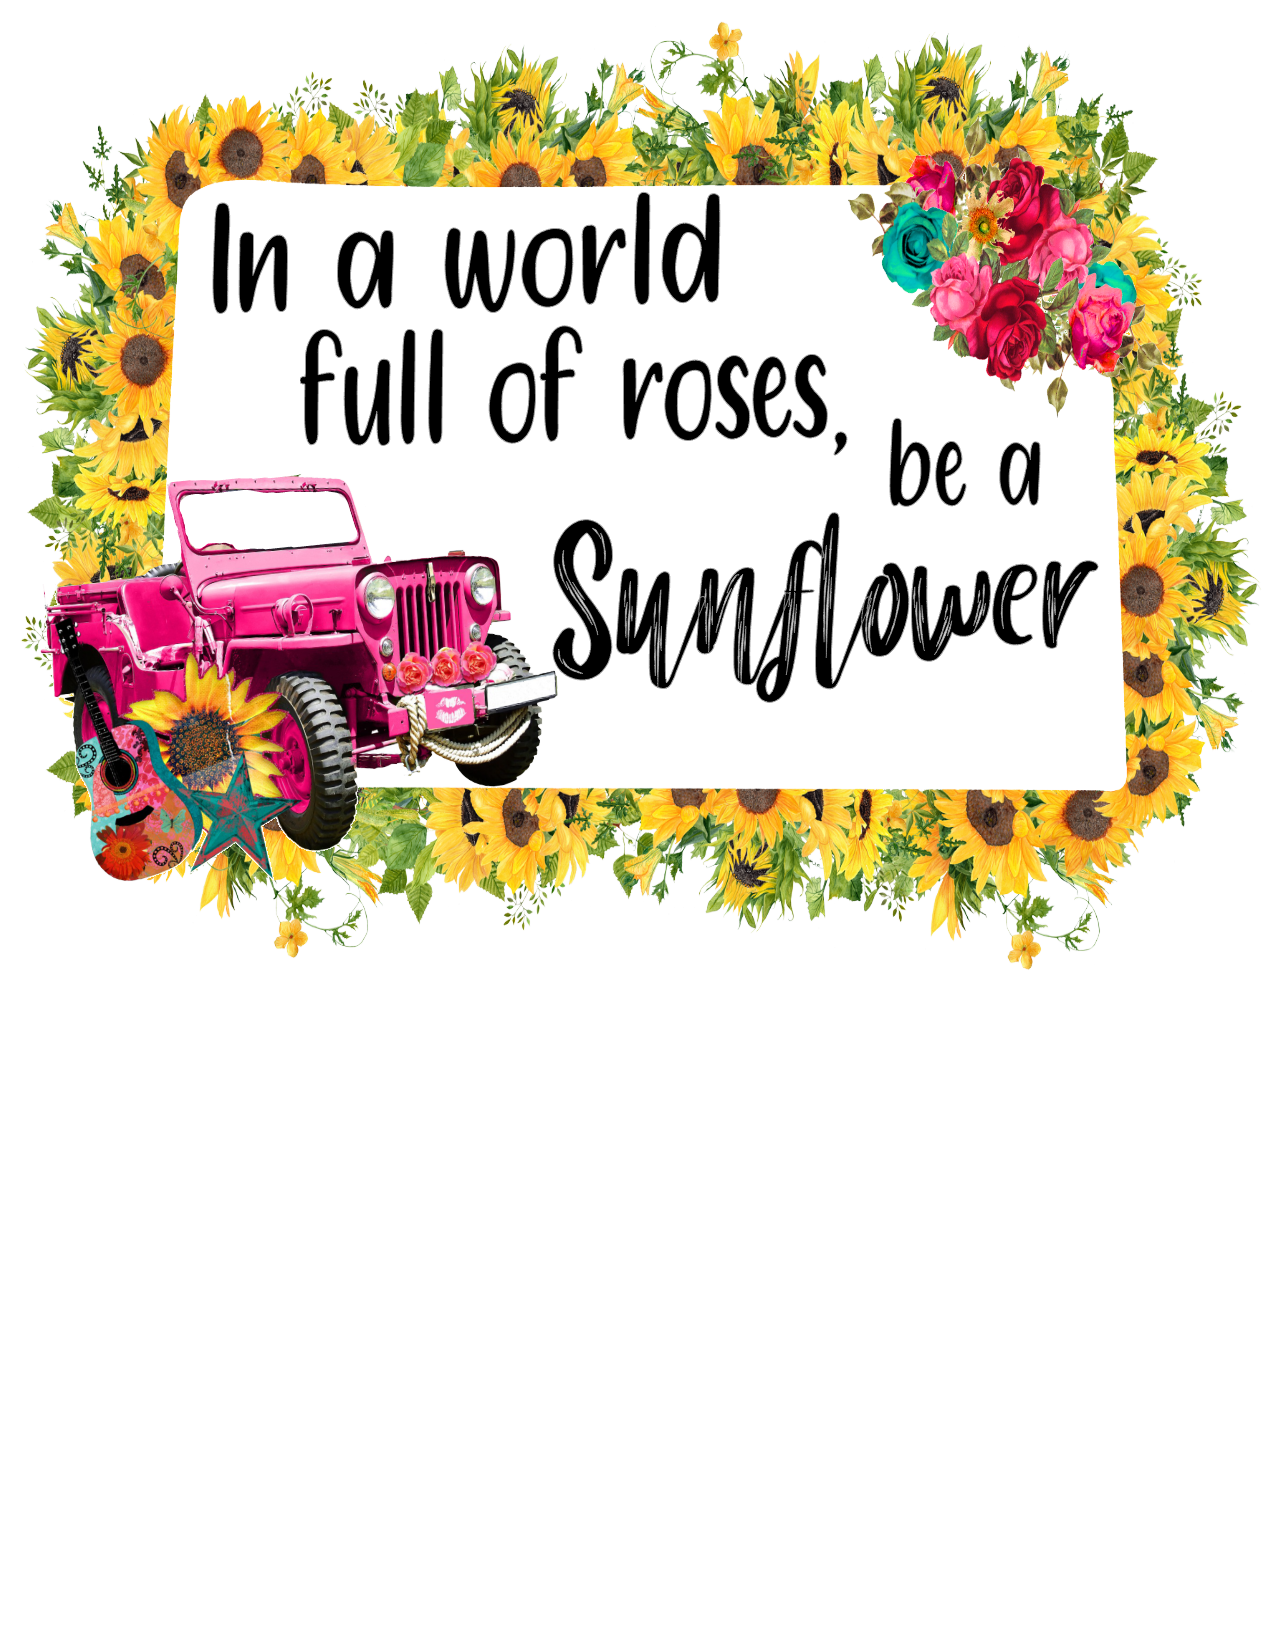 #11 In a world full of roses be a Sunflower